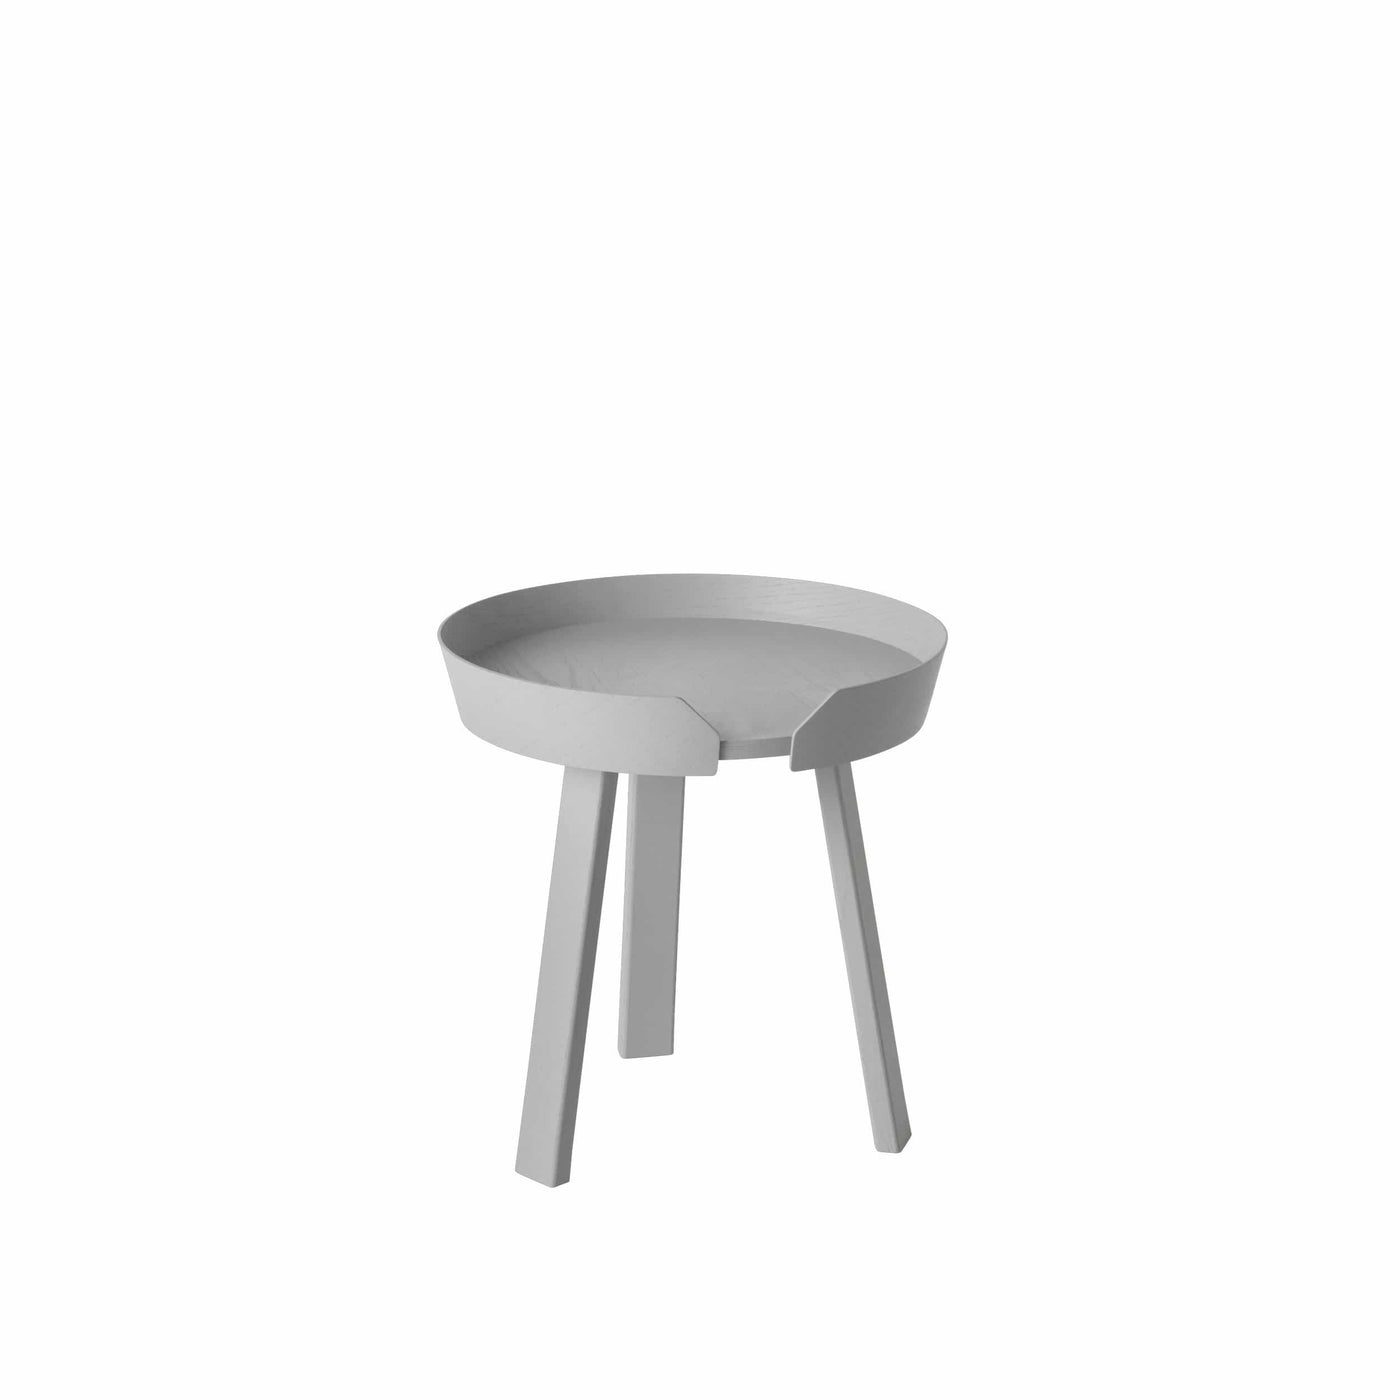 Muuto Around Table small in light grey, available from someday designs     #colour_grey